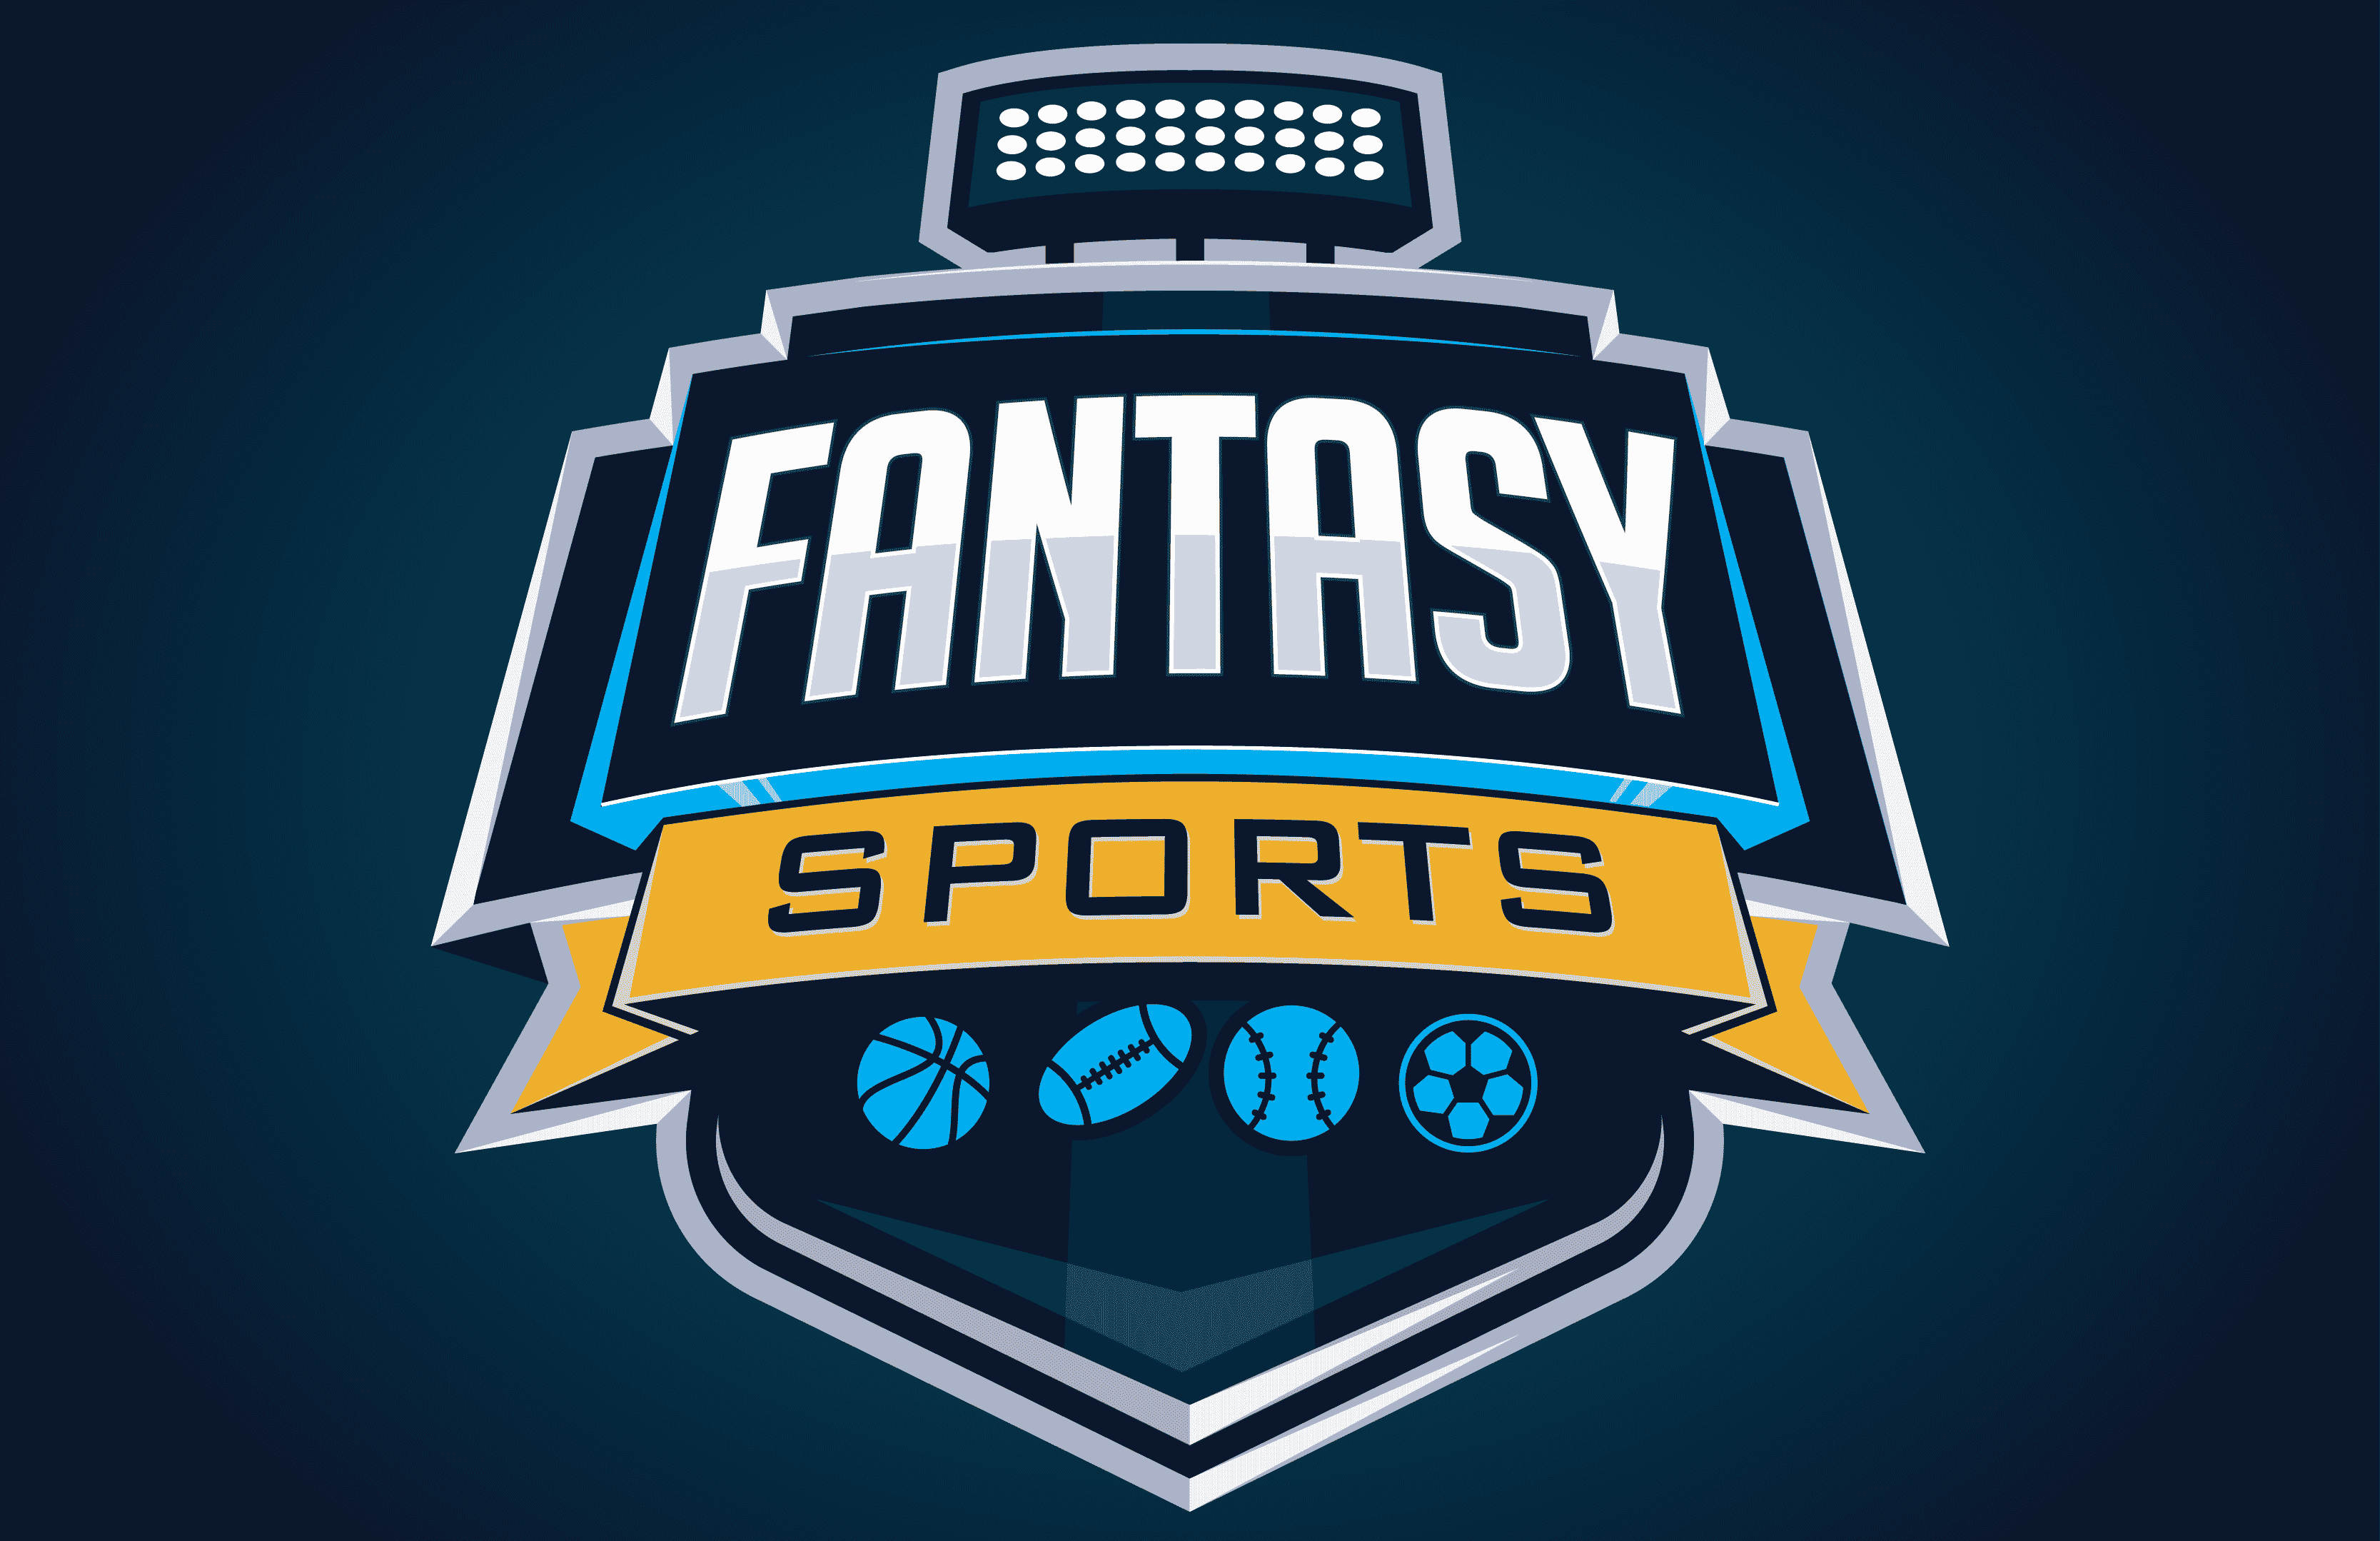 Fantasy Sports and Online Gaming Payment Processing - TouchSuite